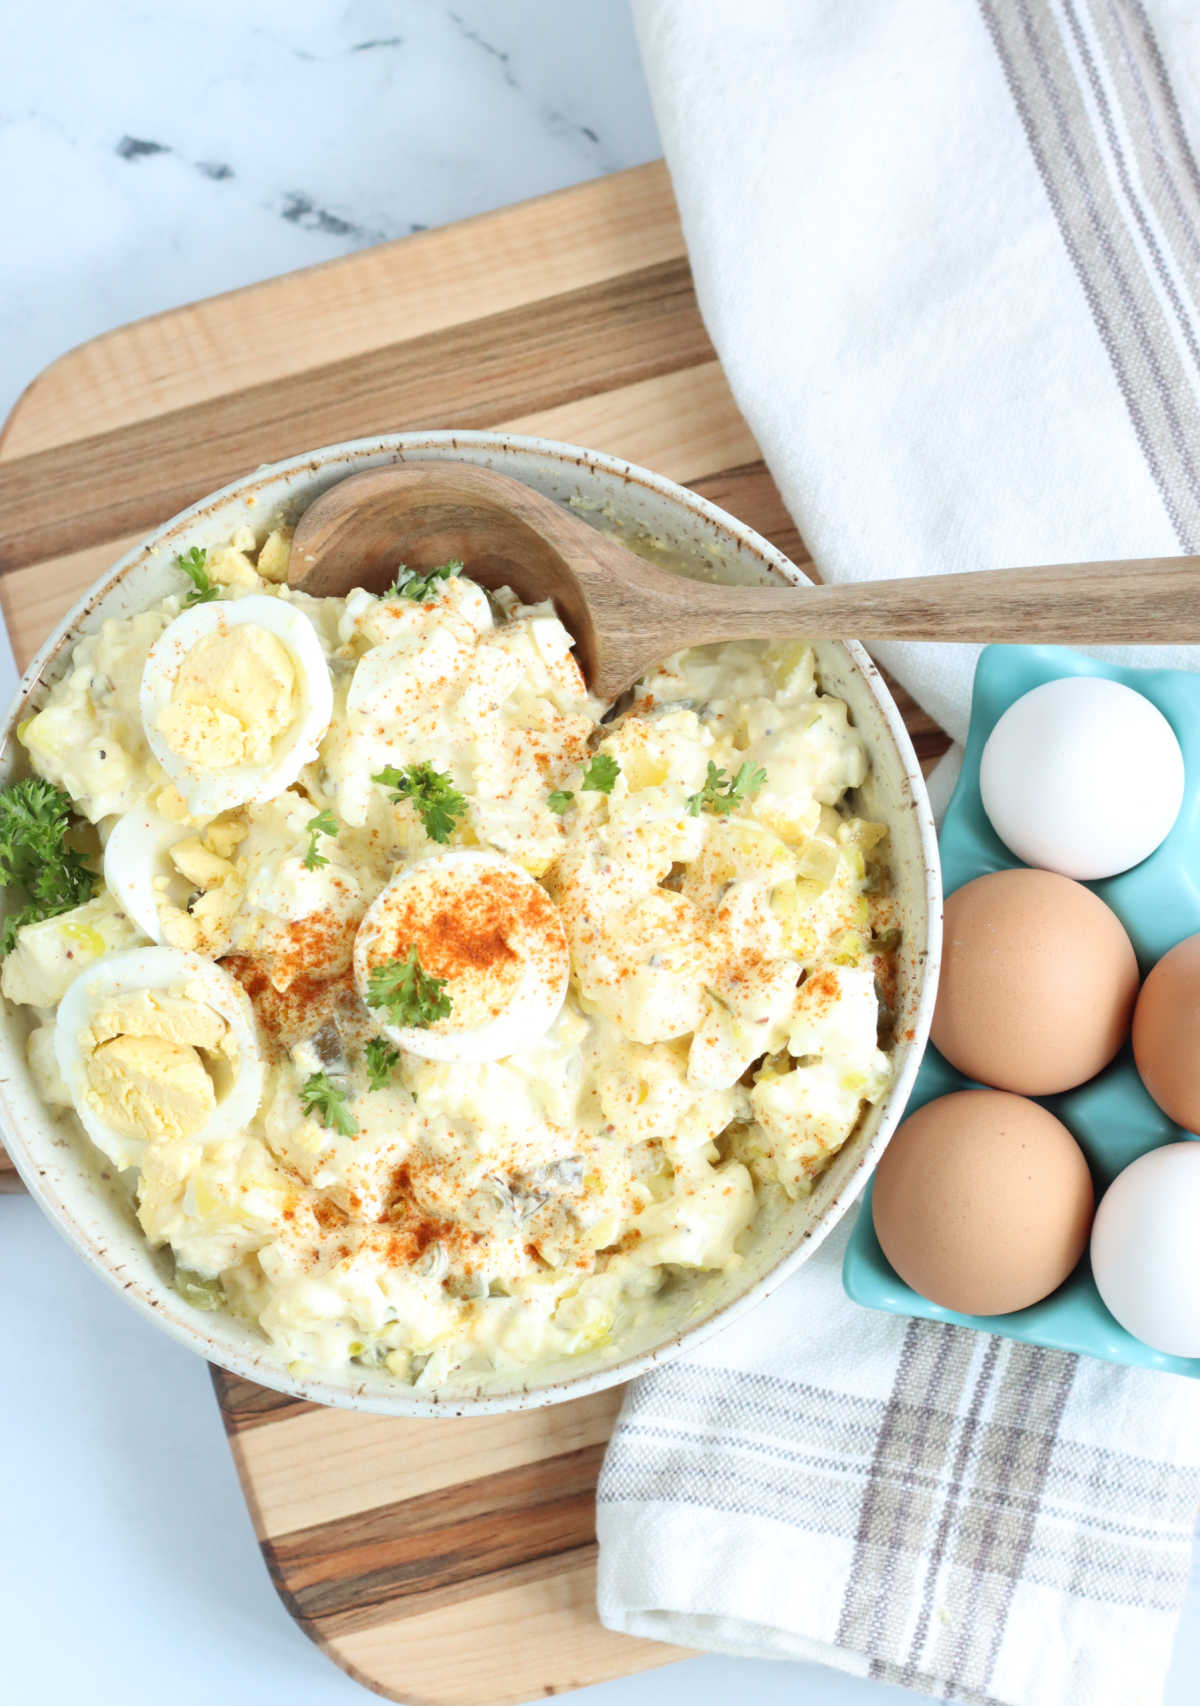 Bowl of potato salad with eggs on wooden cutting board.